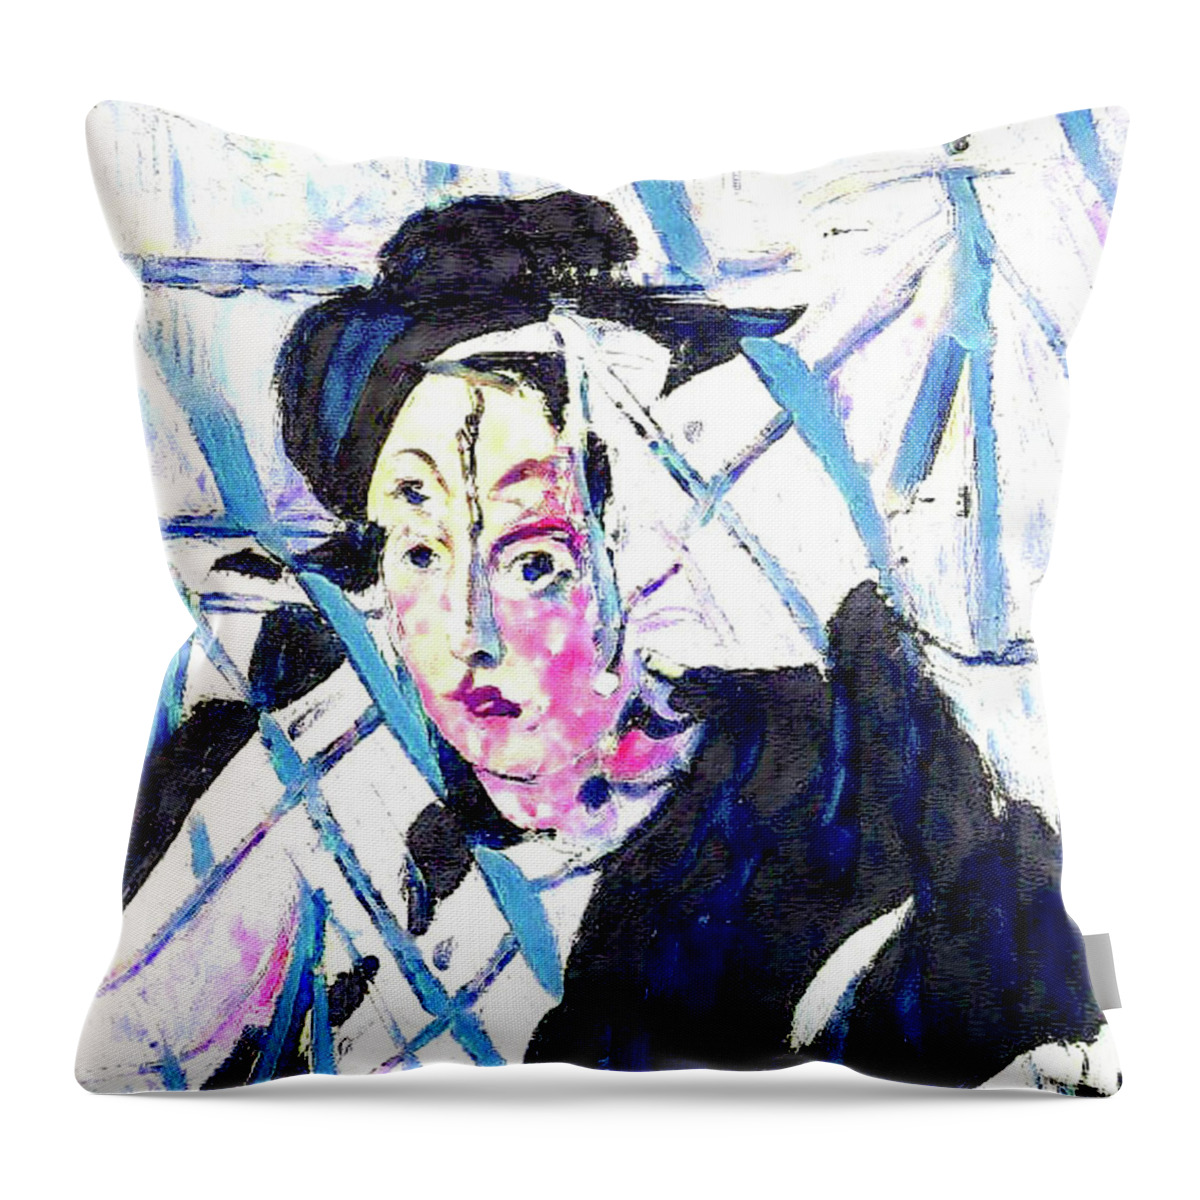 Rembrant #matisse # Monet # Picasso # Gauguin #manet # Brown Throw Pillow featuring the painting That was then This is now IX by Kasey Jones